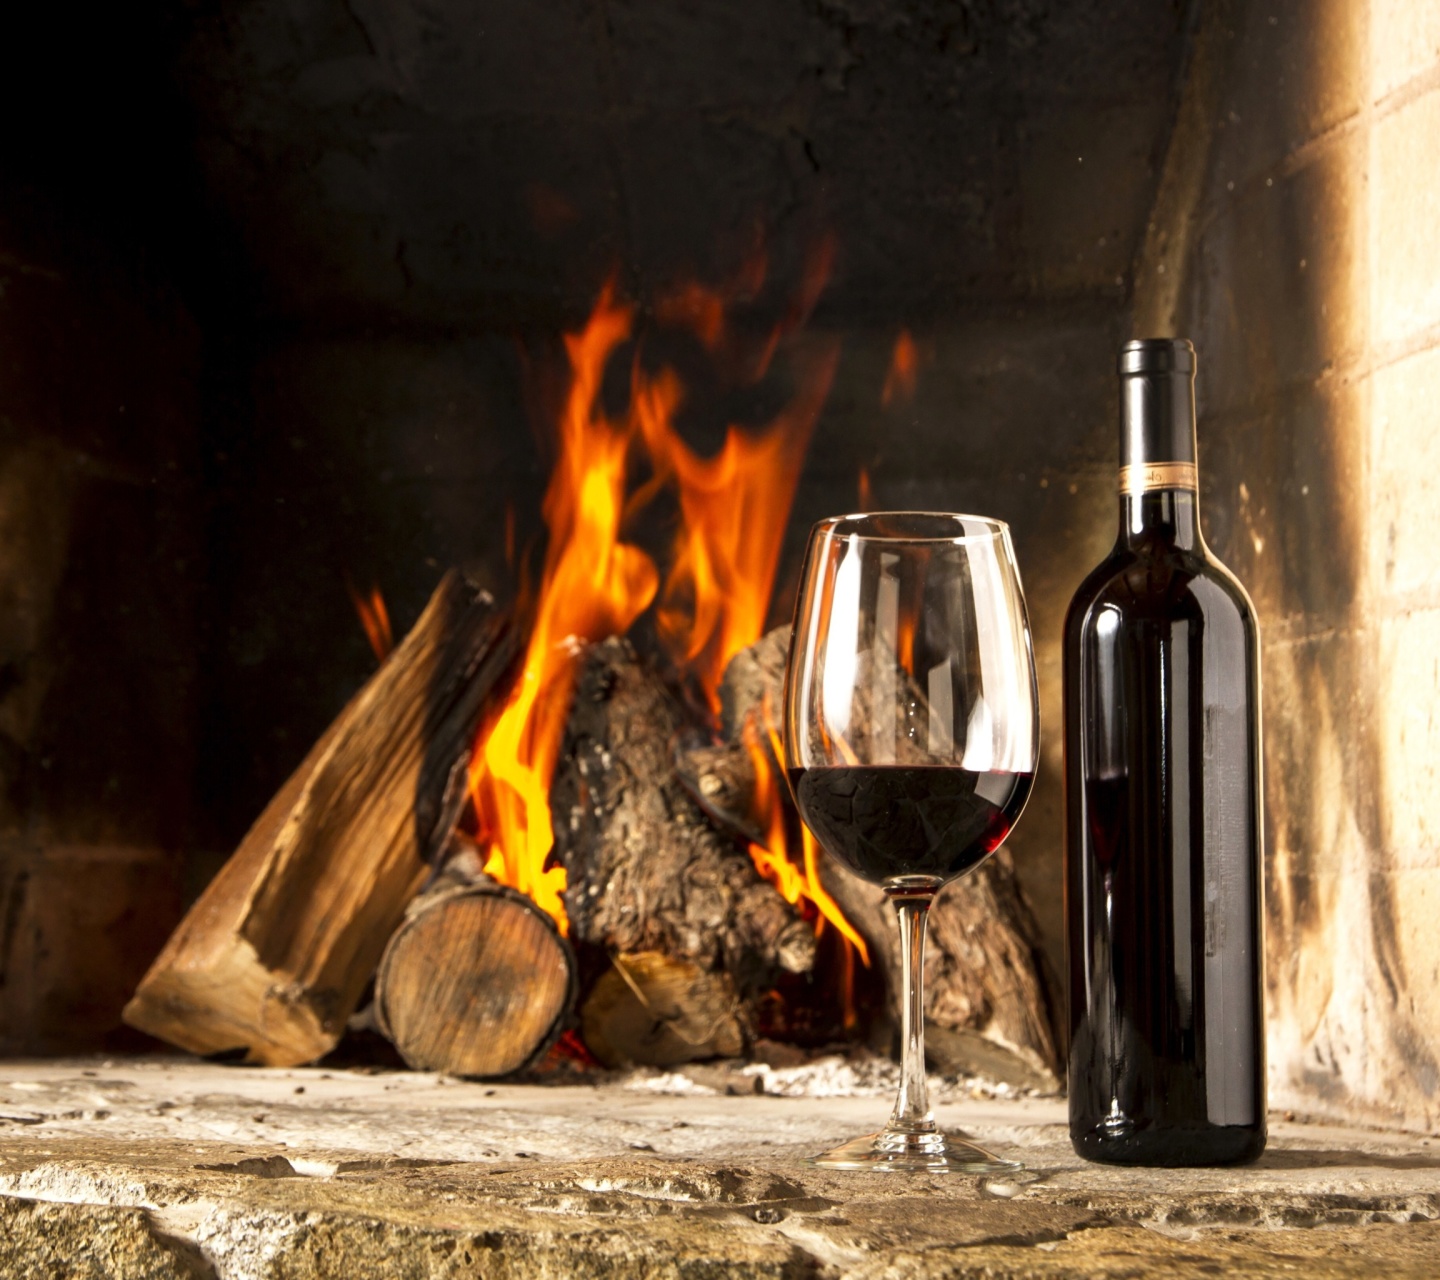 Das Wine and fireplace Wallpaper 1440x1280